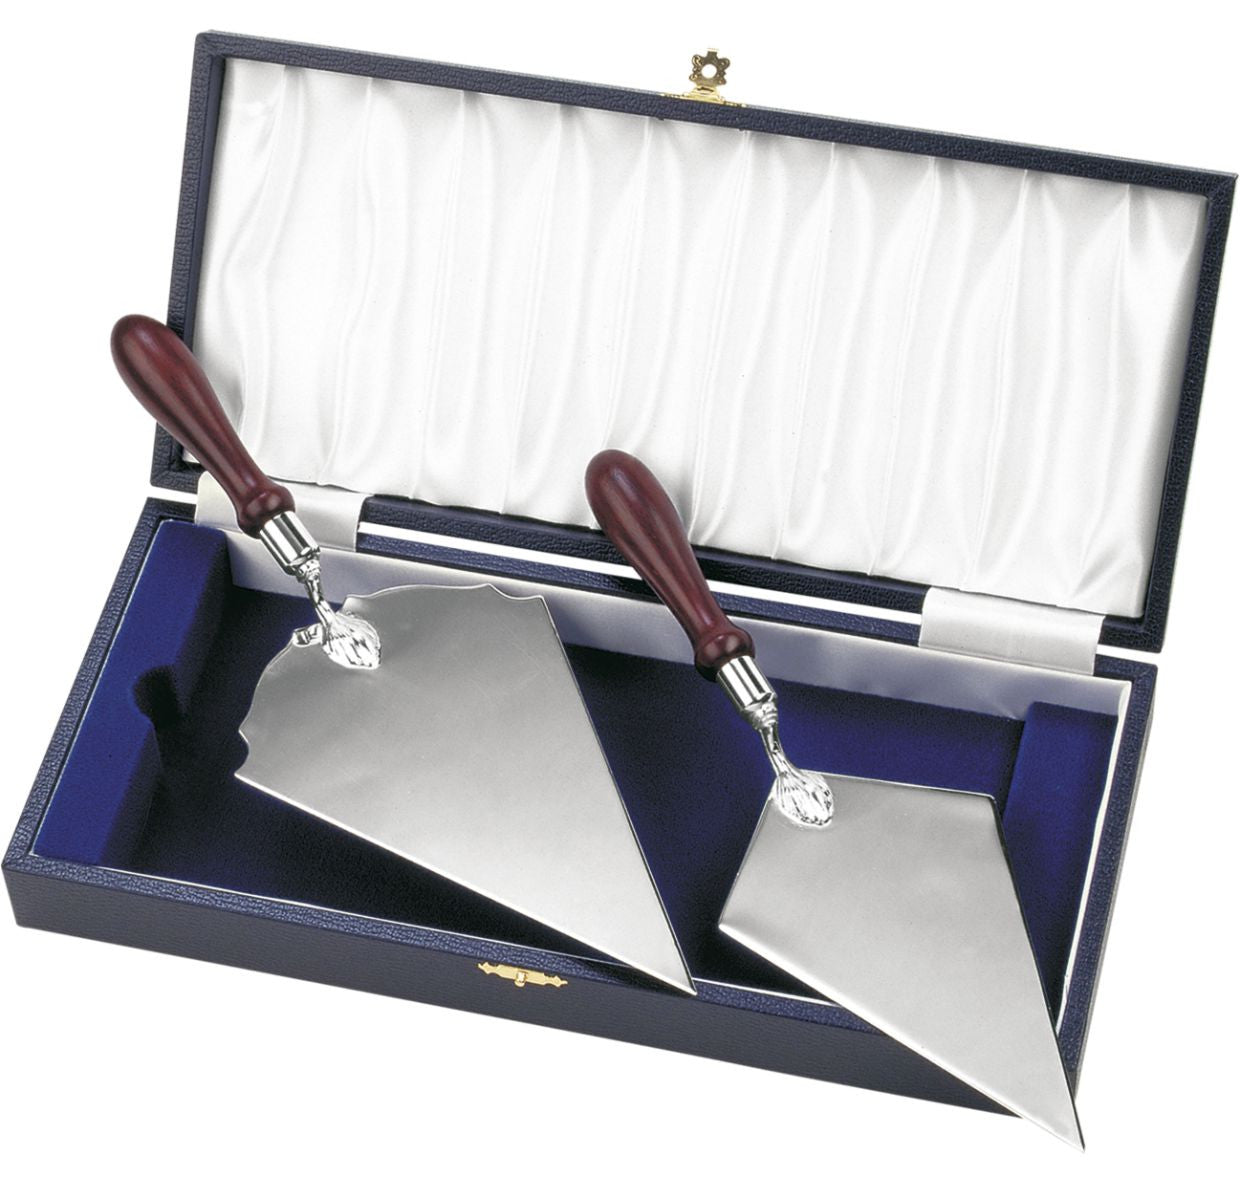 Silver Plated Trowels - Bracknell Engraving & Trophy Services